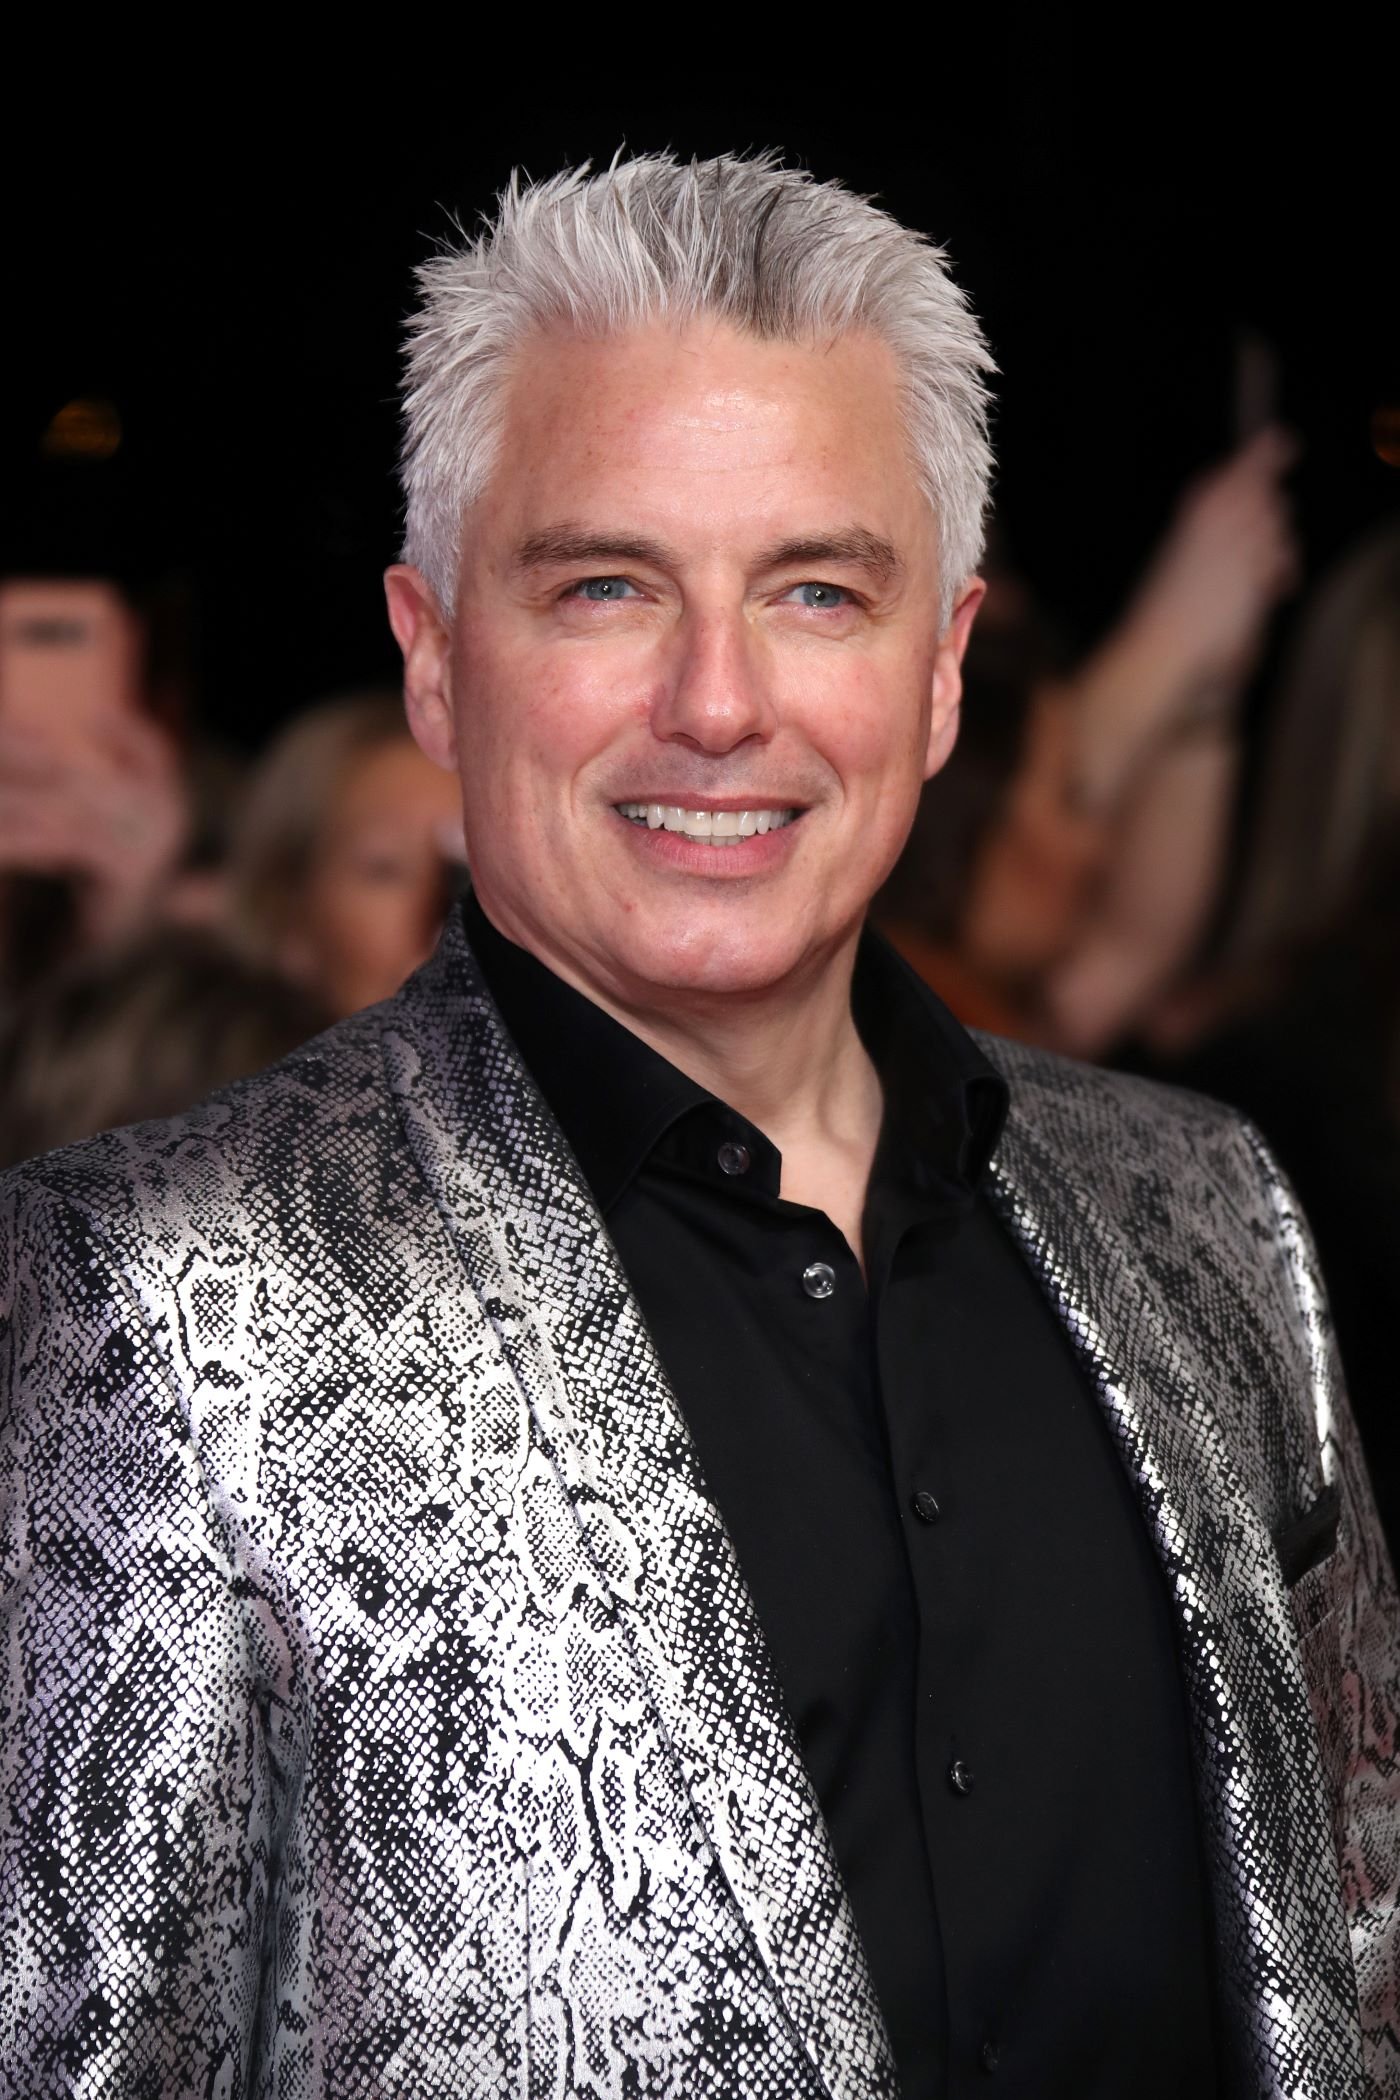 John Borrowman stands in front of a blurred black background with people in it wearing a black button-up shirt and a silver and black metallic snake print suit jacket.